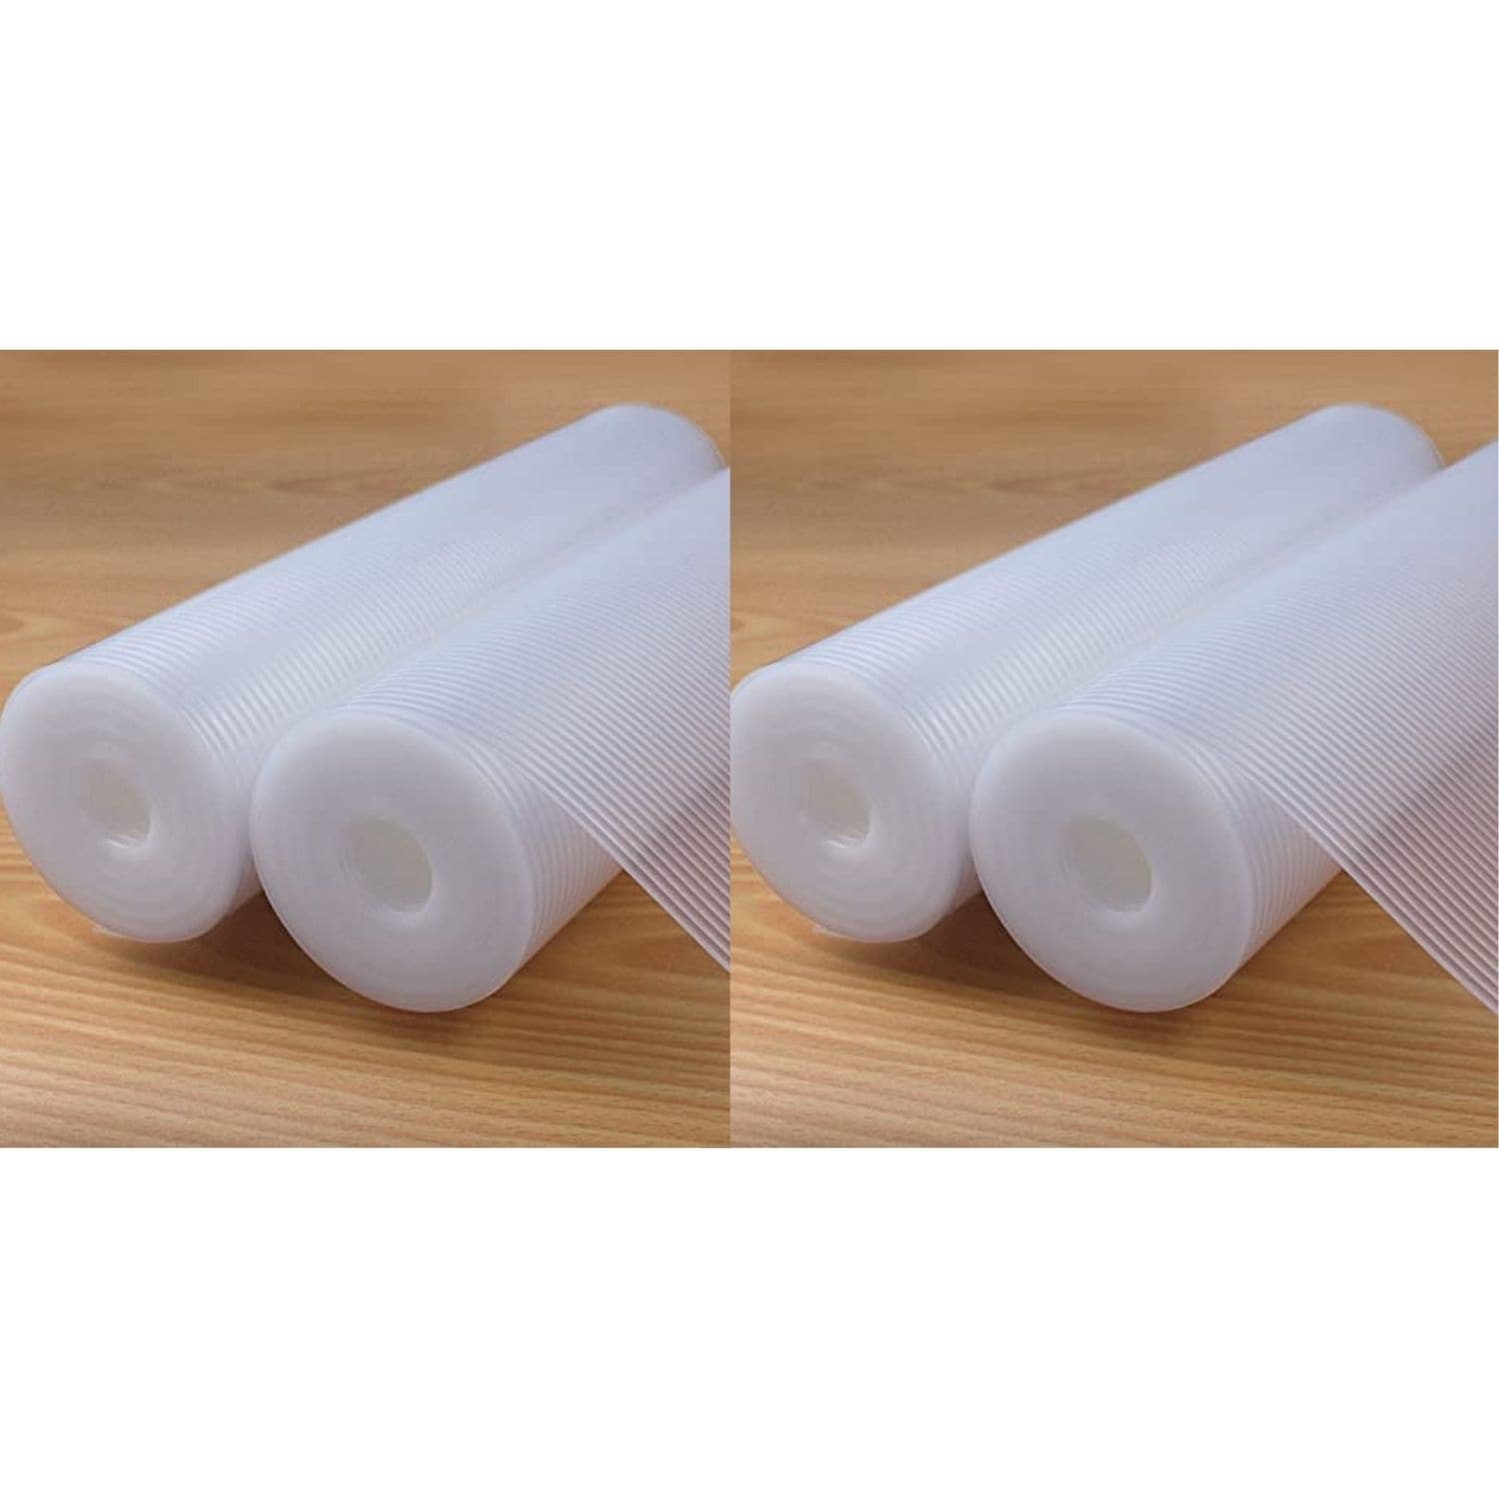 https://ak1.ostkcdn.com/images/products/is/images/direct/e214994dab67f2d83de36ffe45cf0d3646ef6fa3/Glomen-Premium-Clear-Non-Adhesive-Non-Slip-Shelf-and-Drawer-Liner-12-Inches-x-20-FT-Set-of-4.jpg